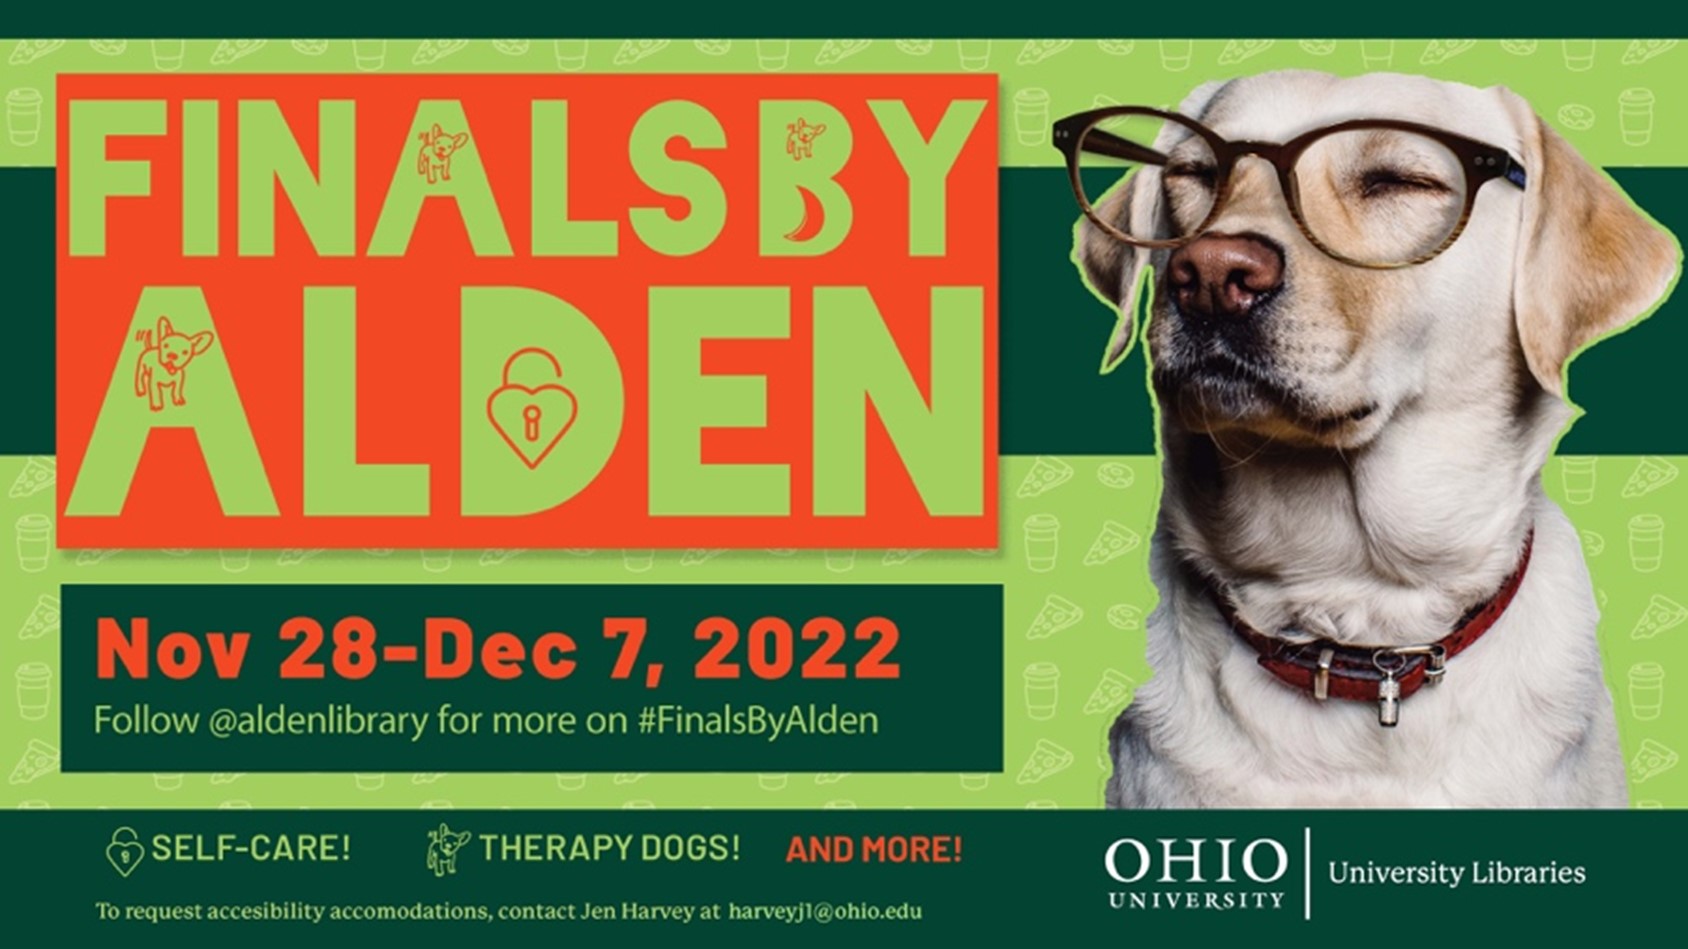 Banner image advertising Finals by Alden events for fall semester of 2022